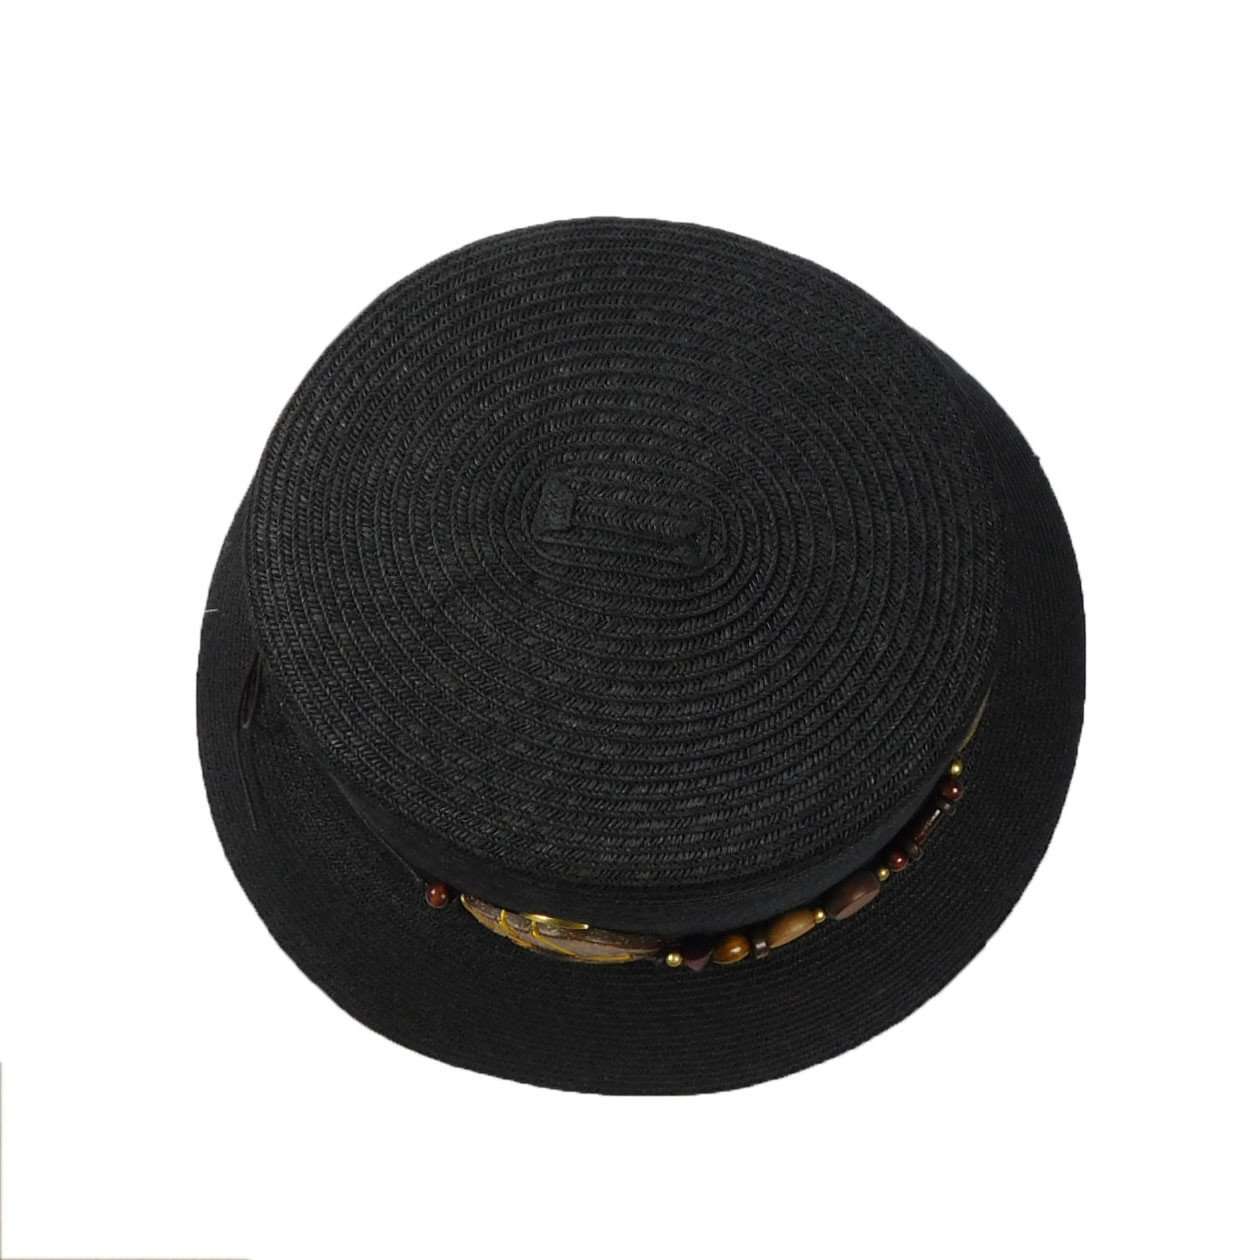 Black Summer Hat with Wood Beads Wide Brim Hat Great hats by Karen Keith    